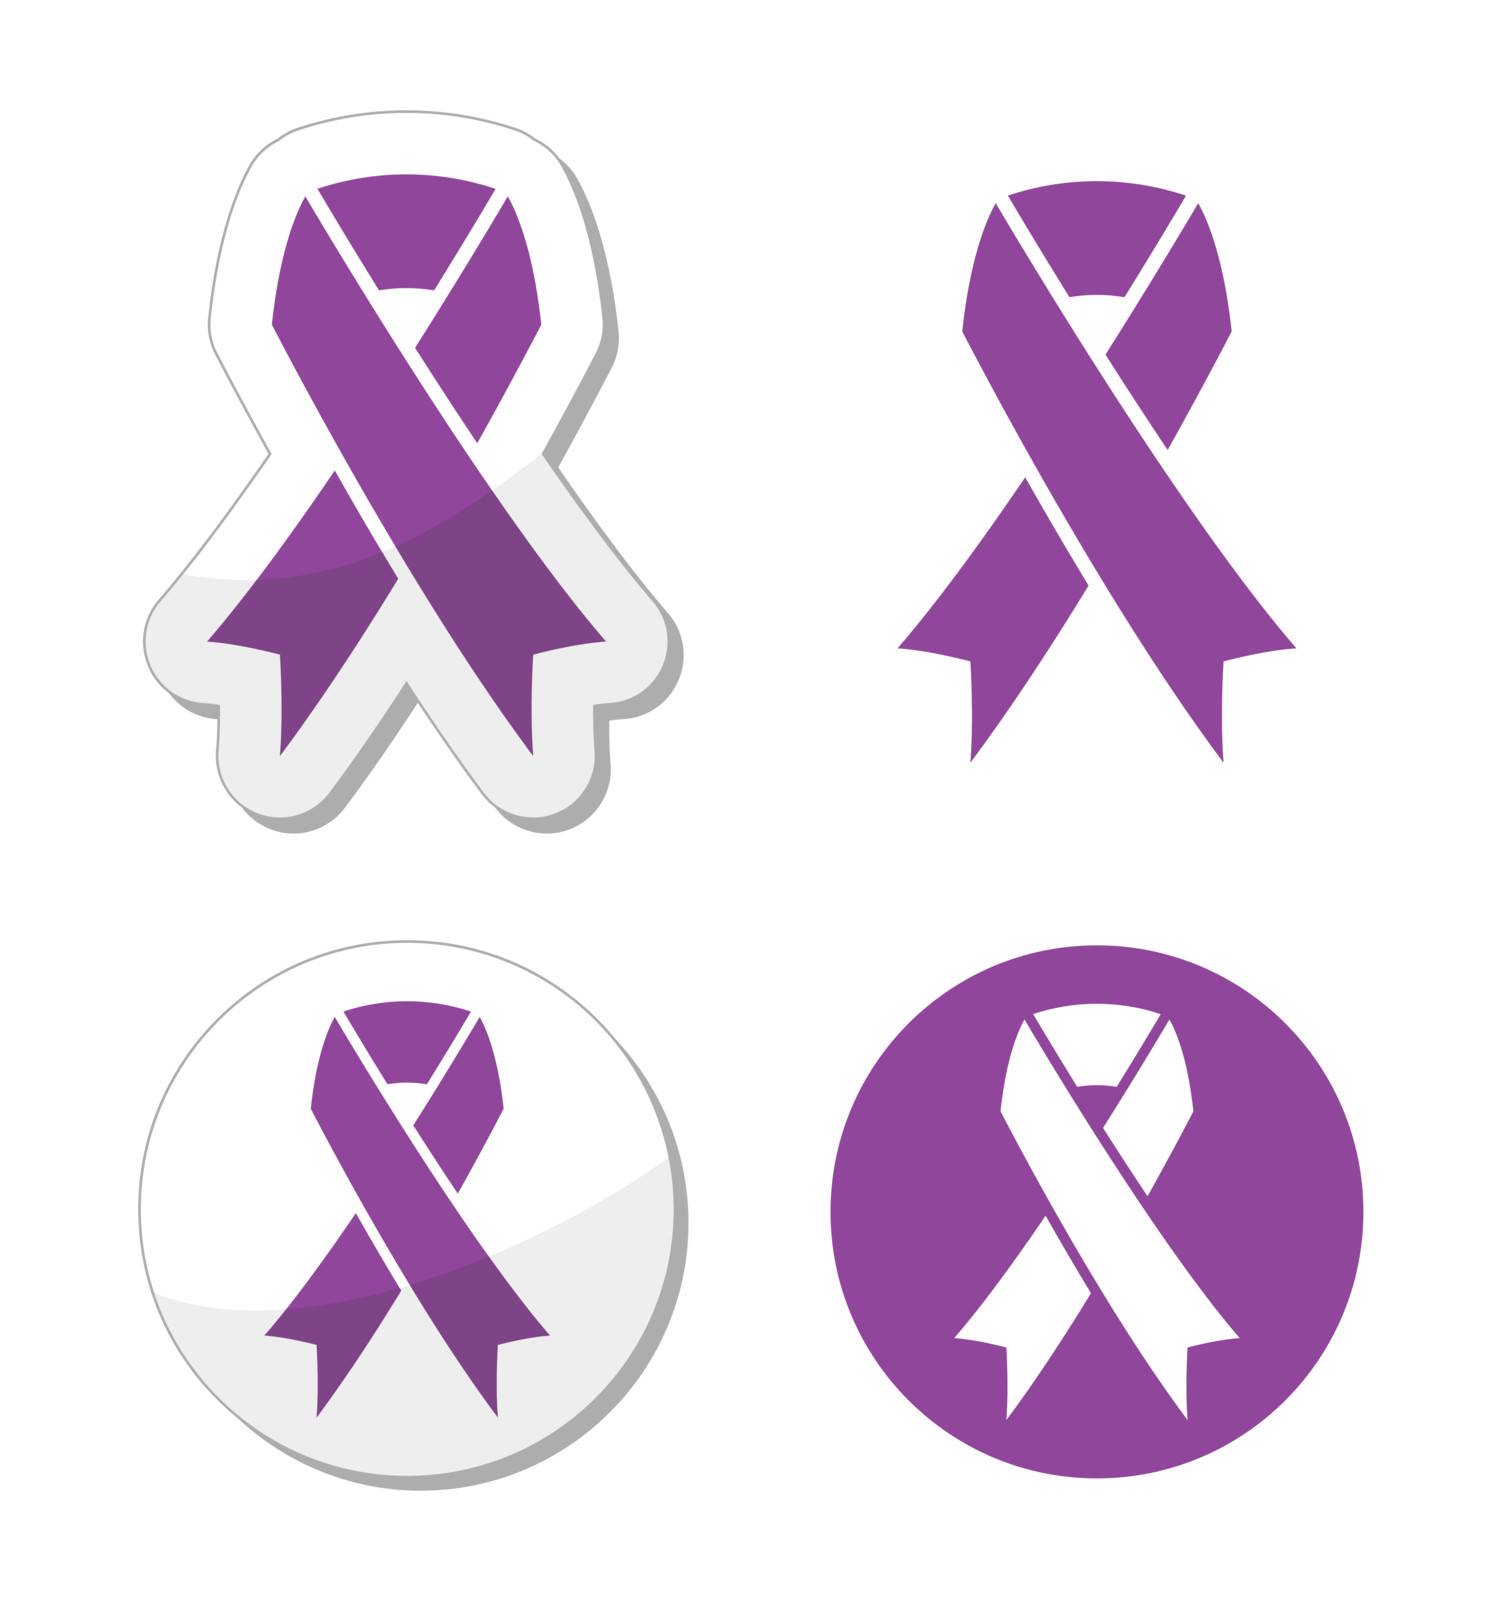 Purple ribbon - pancreatic cancer, testicular cancer, domestic violence awereness symbol by RedKoala